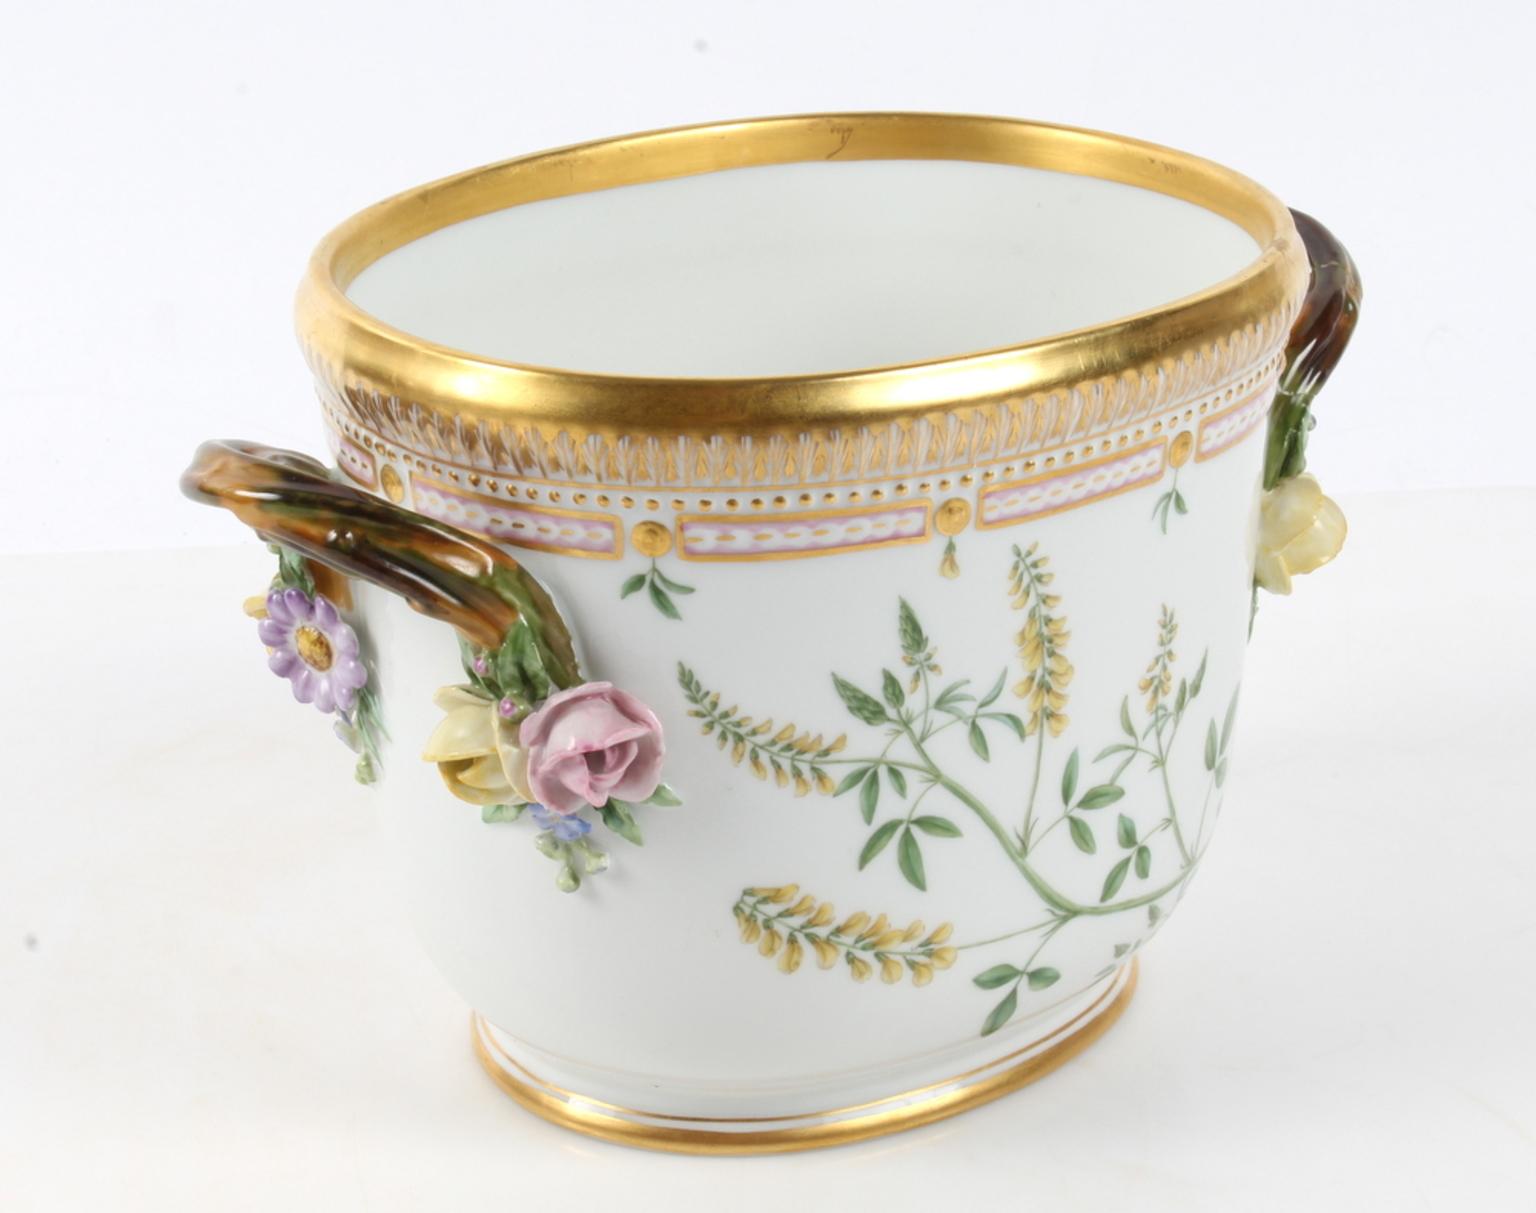 Royal Copenhagen Flora Danica oval wine cooler #3569.
Measures: 27 cm x 16.5 cm (10 3/5 inches x 6 1/2 inches)
Repair on one handle and minor damage on one rose and flower.